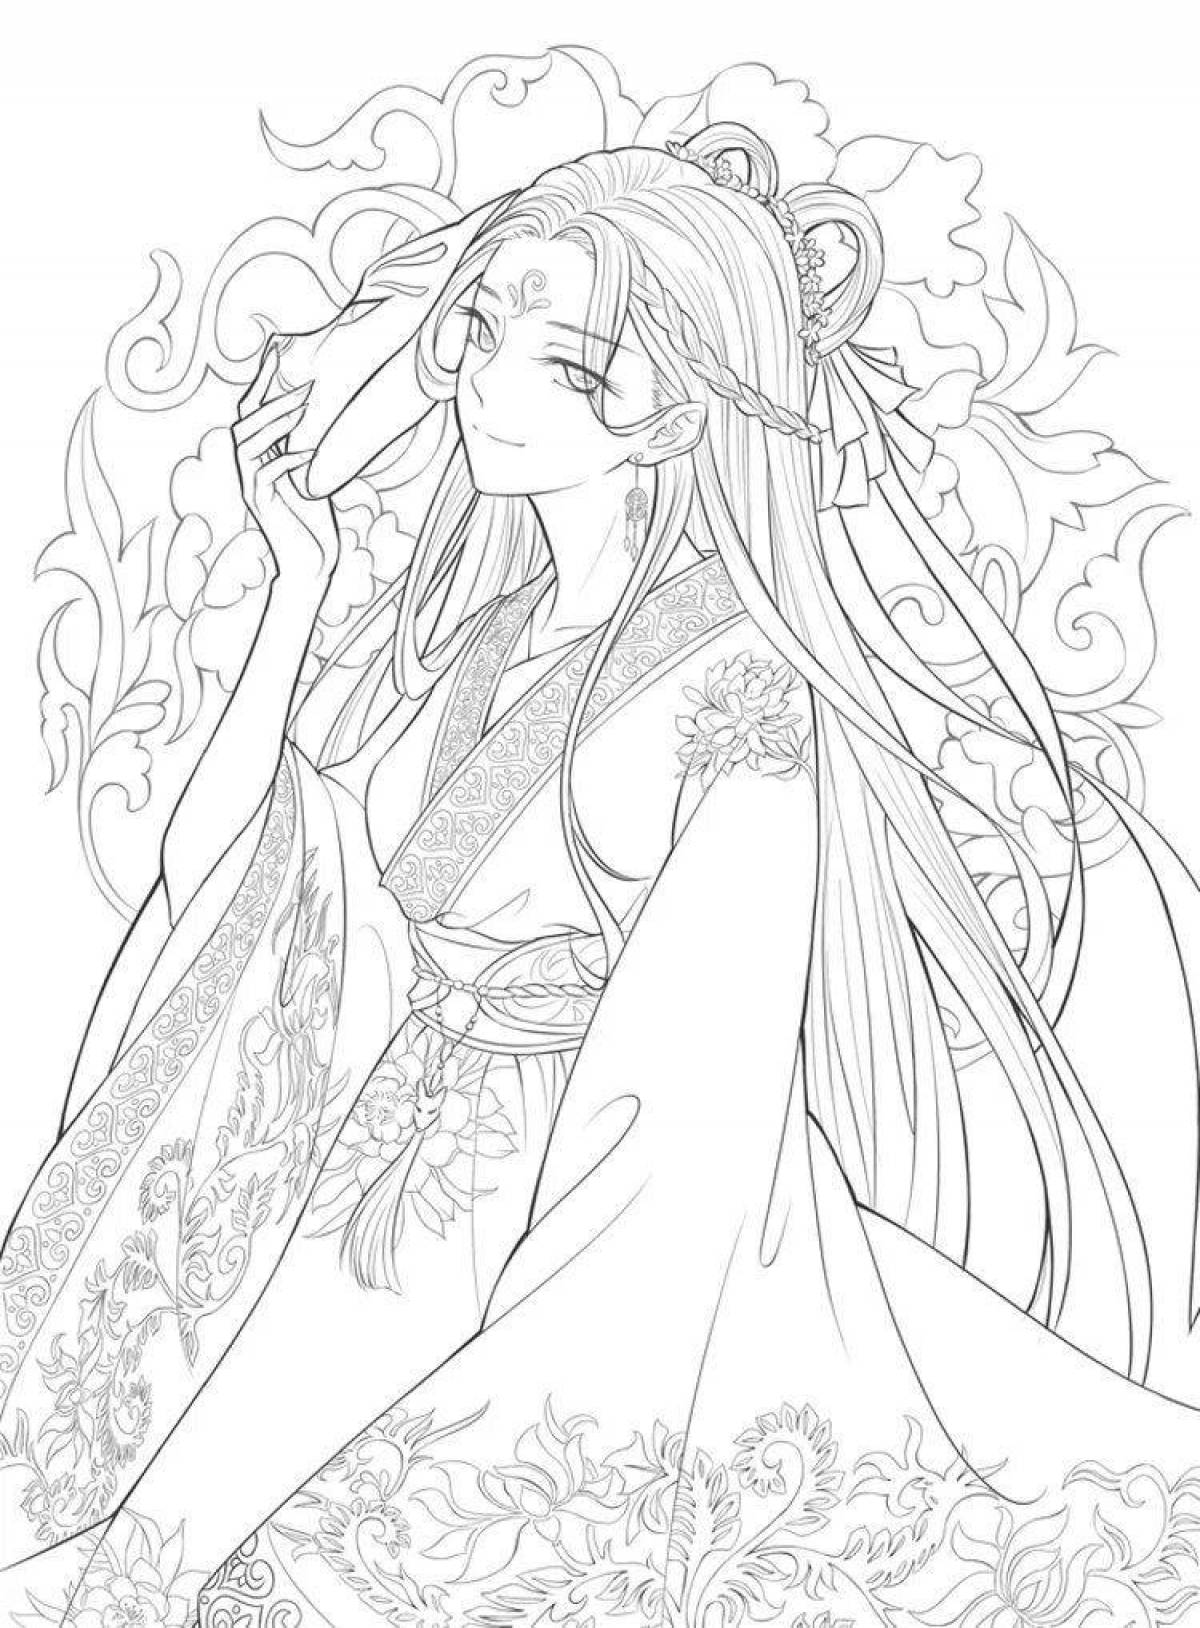 Chinese women coloring page